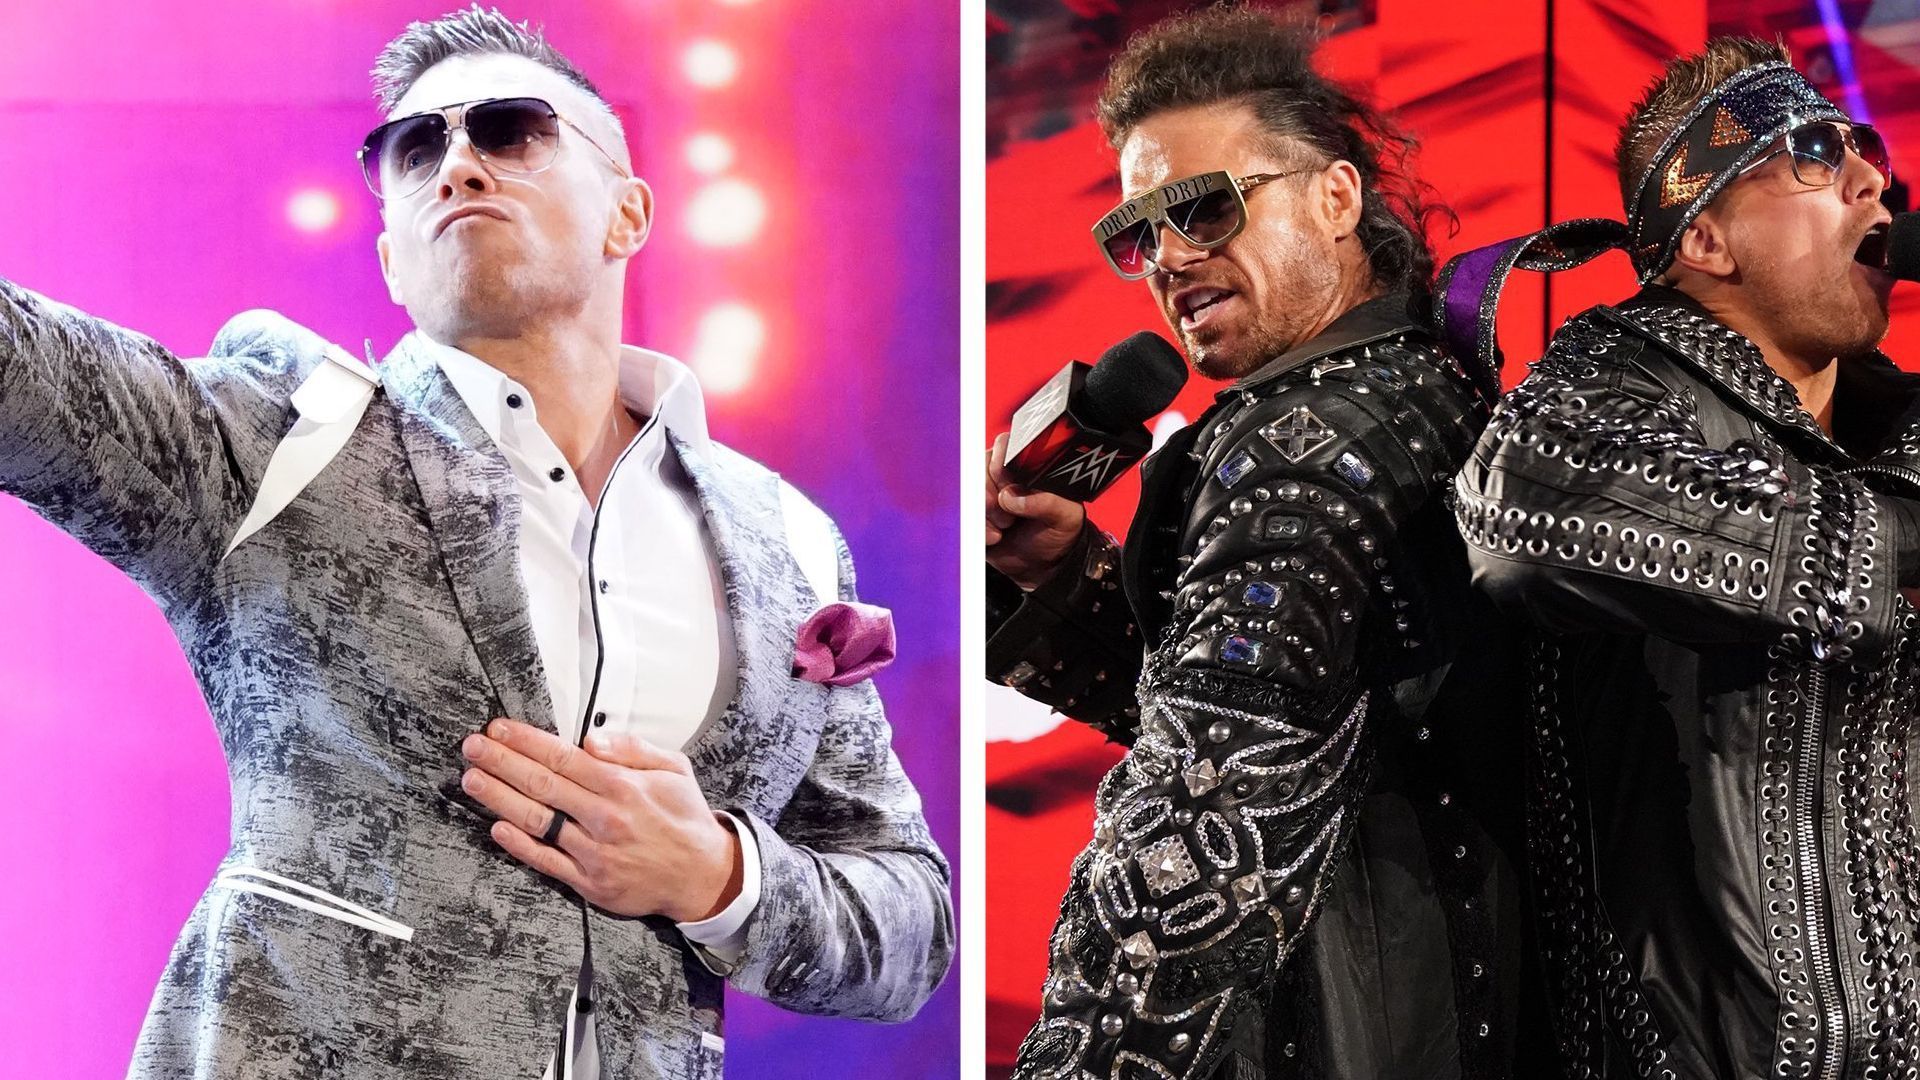 The Miz has helped bring back several former stars to WWE